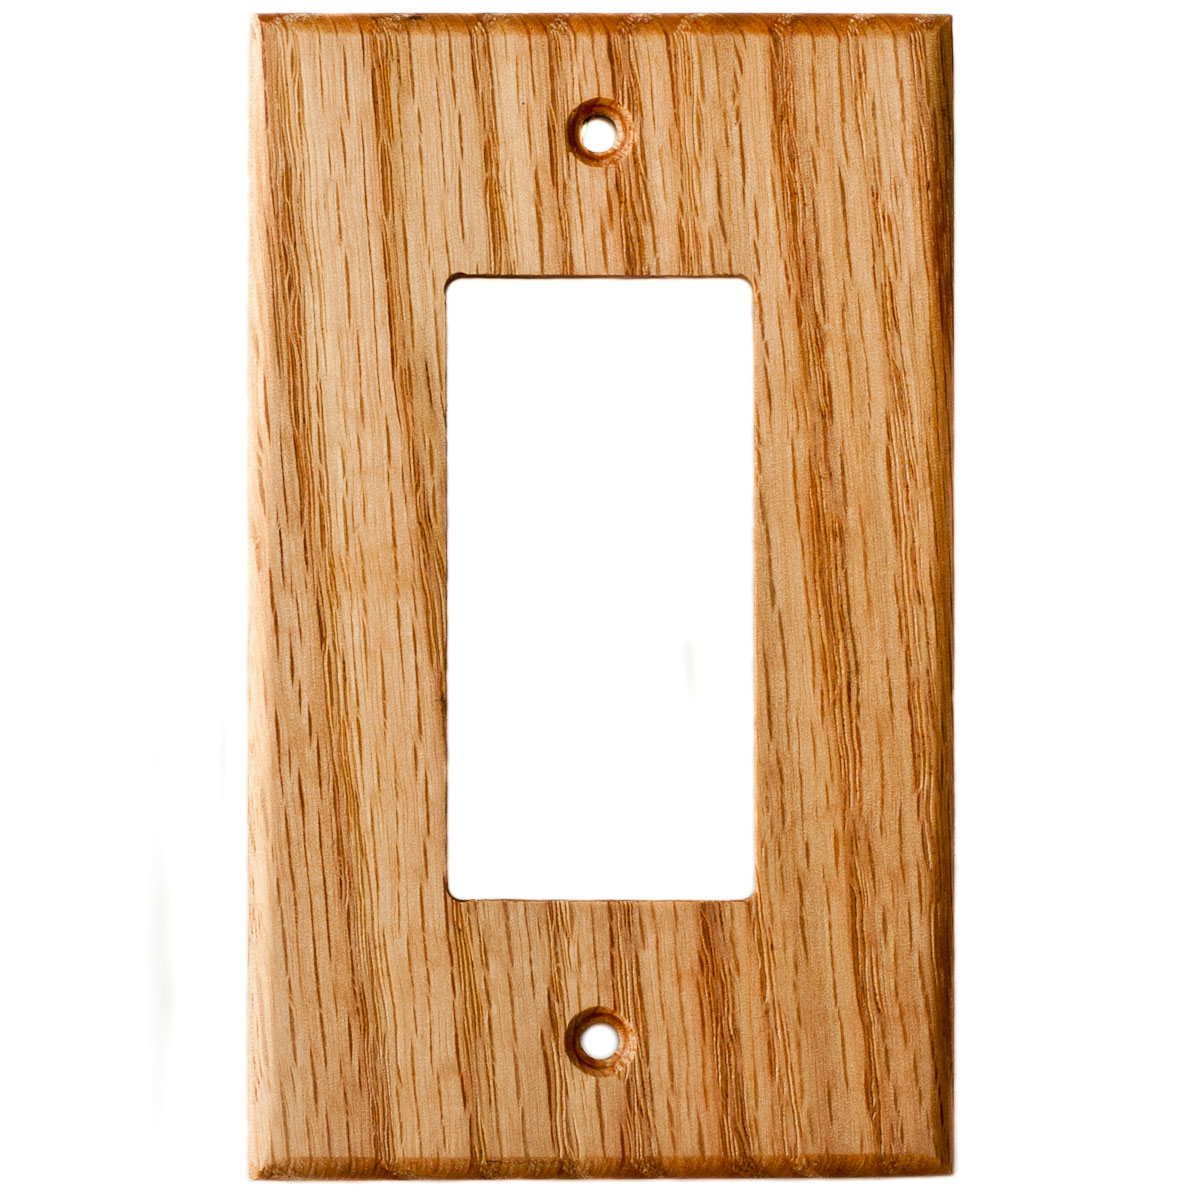 Brainerd 64654 Medium Oak Wood Double GFCI Outlet Cover Wall Plate 